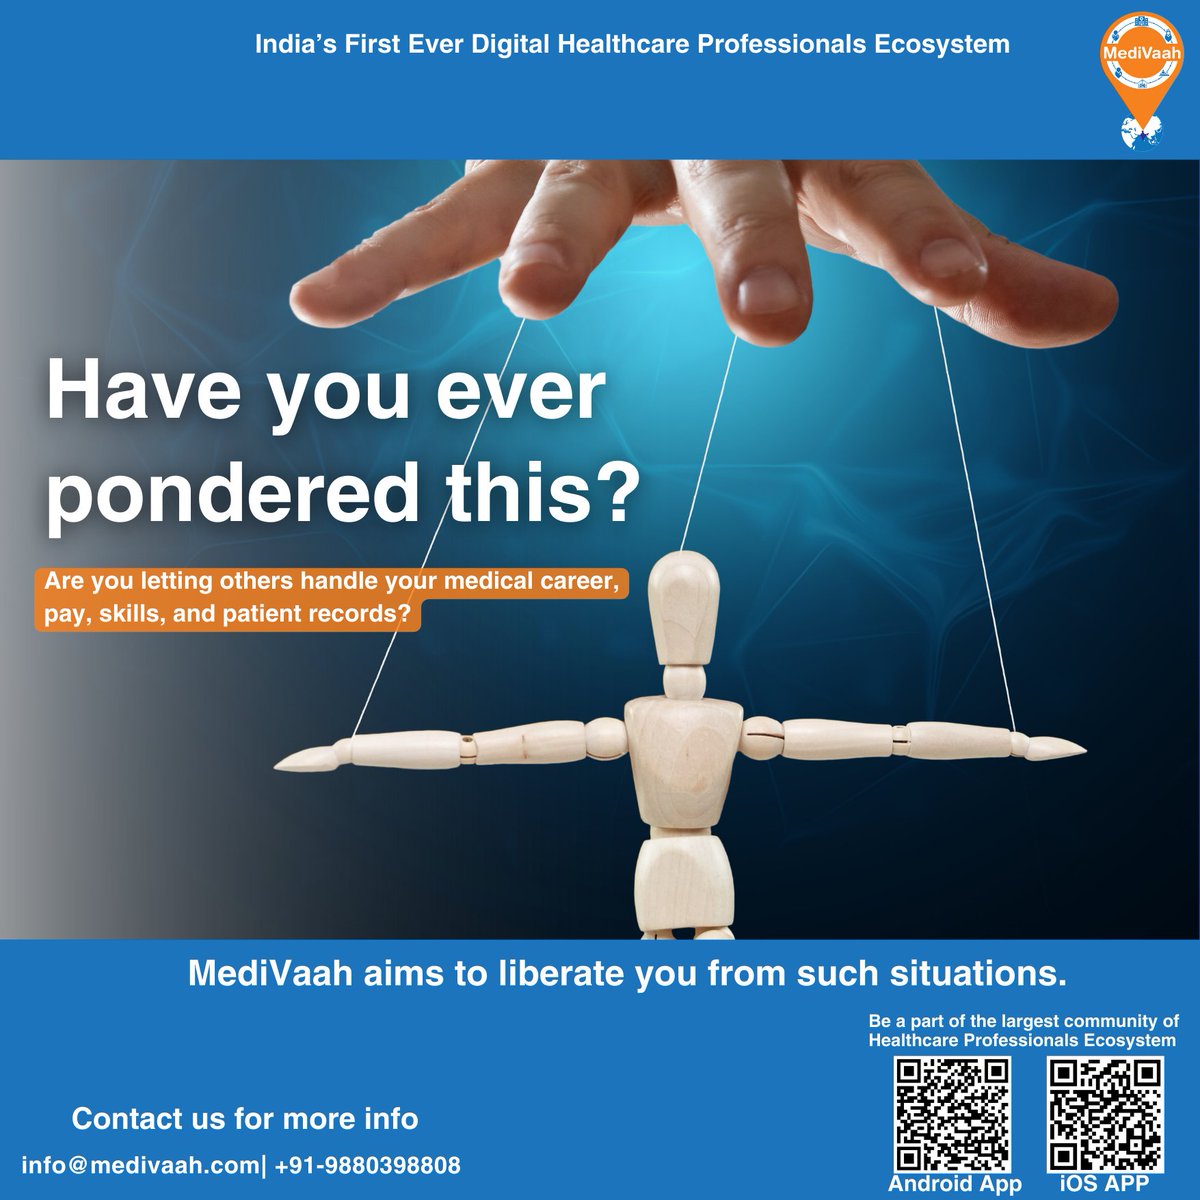 Dear Doctors!
Are you letting others handle your medical career, pay, skills, and patient records?
Then it's time to be part of the largest community of Healthcare Professionals Ecosystem
#Doctors #MedicalPractice #healthcare #healthcareprofessionals